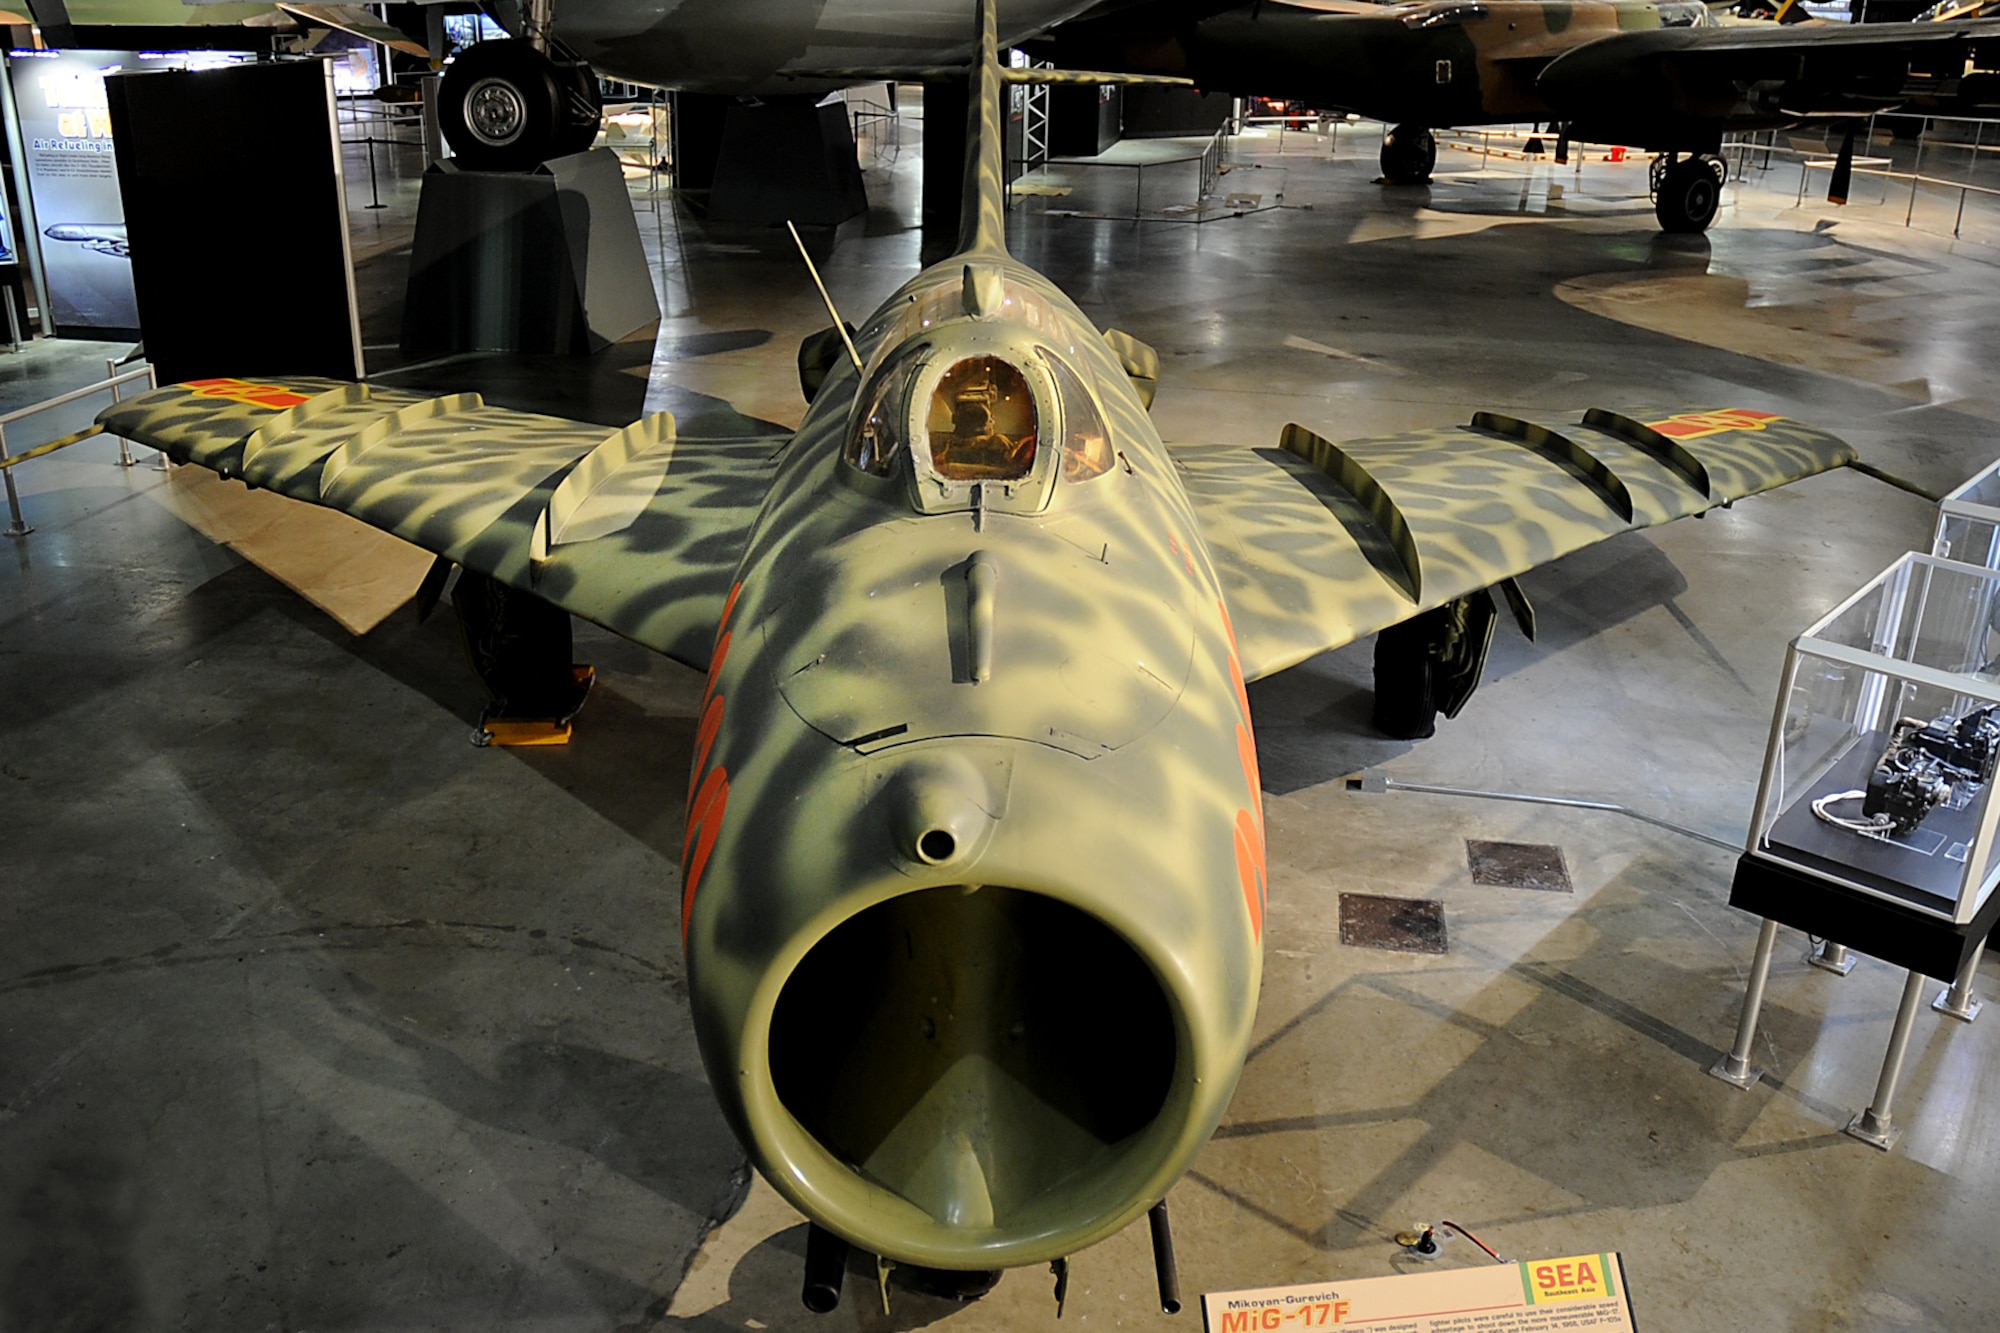 DAYTON, Ohio - Mikoyan-Gurevich MiG-17F in the Southeast Asia War Gallery at the National Museum of the United States Air Force. (U.S. Air Force photo) 
